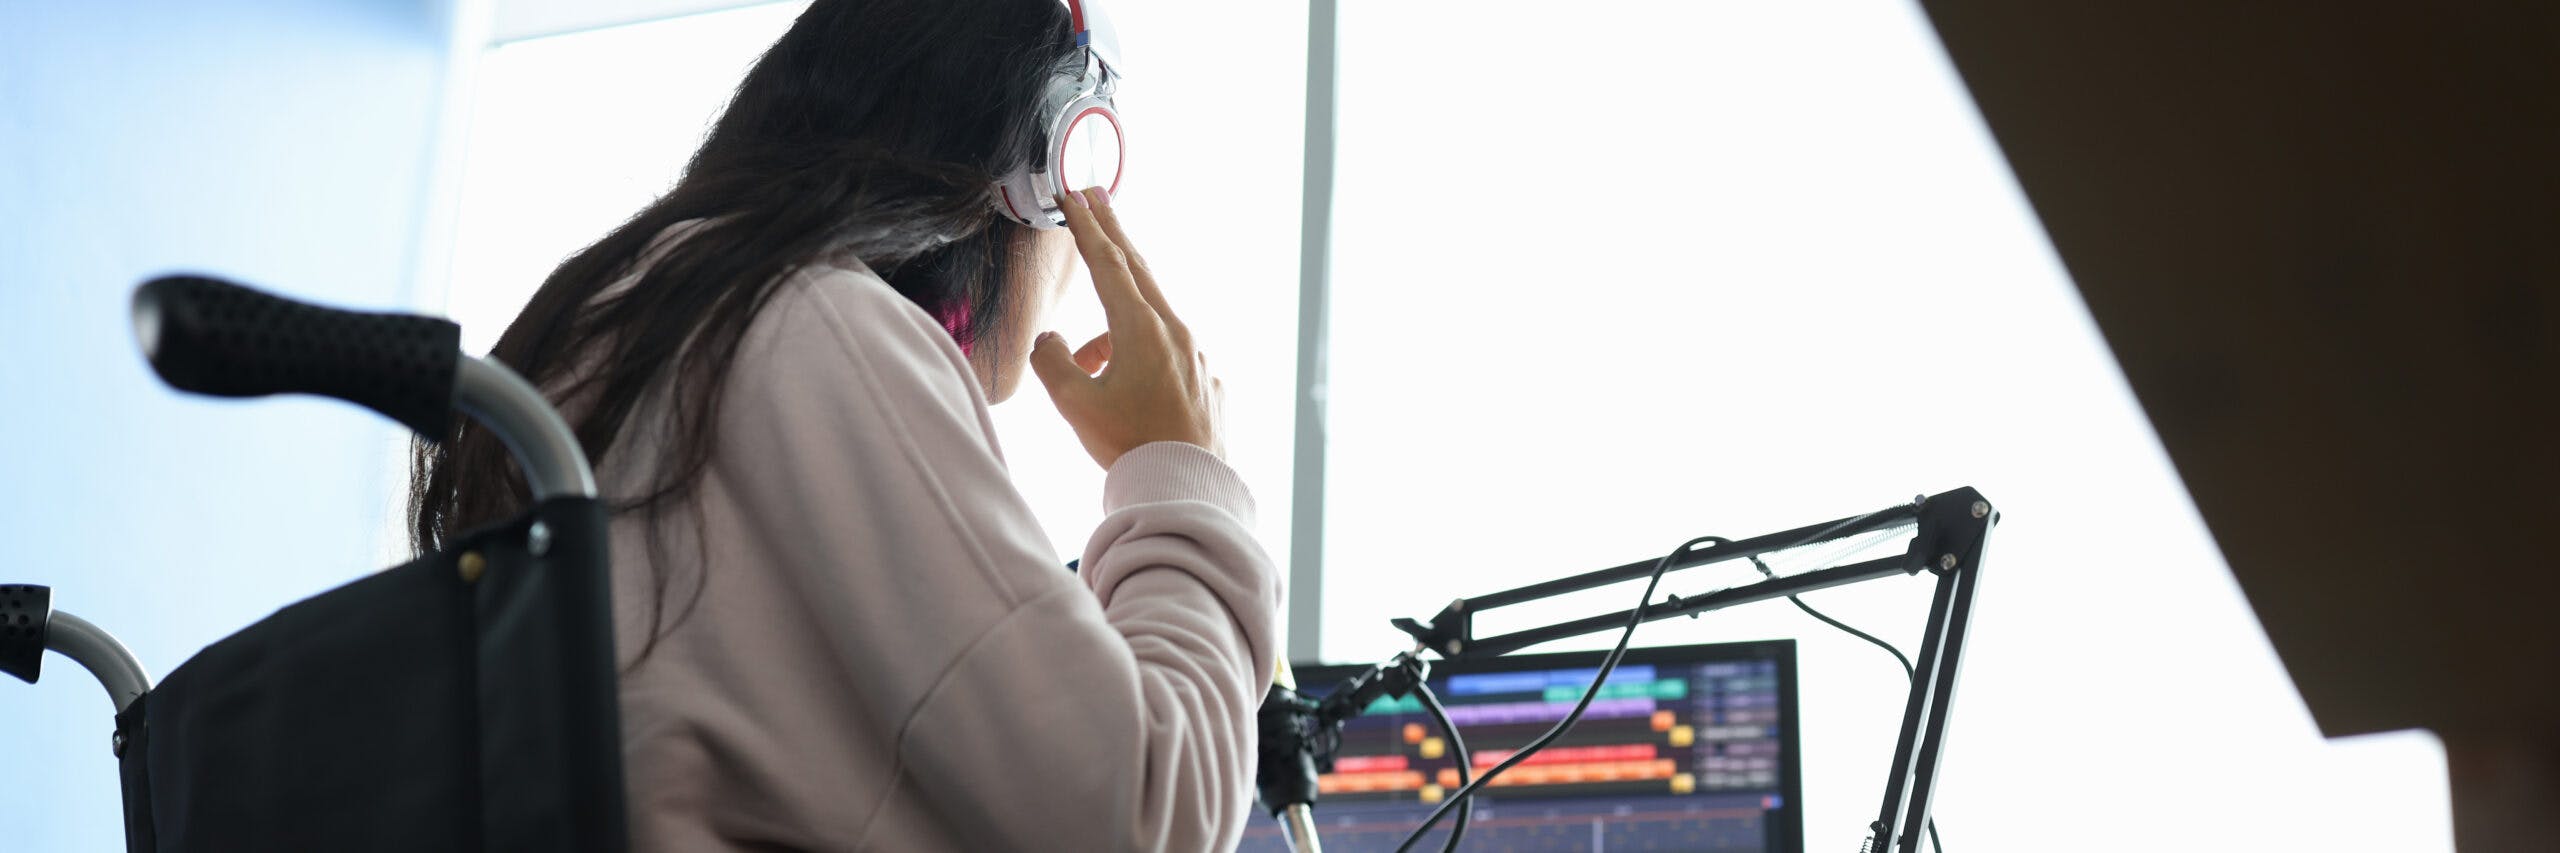 Woman in wheelchair with headphones in front of microphone and computer